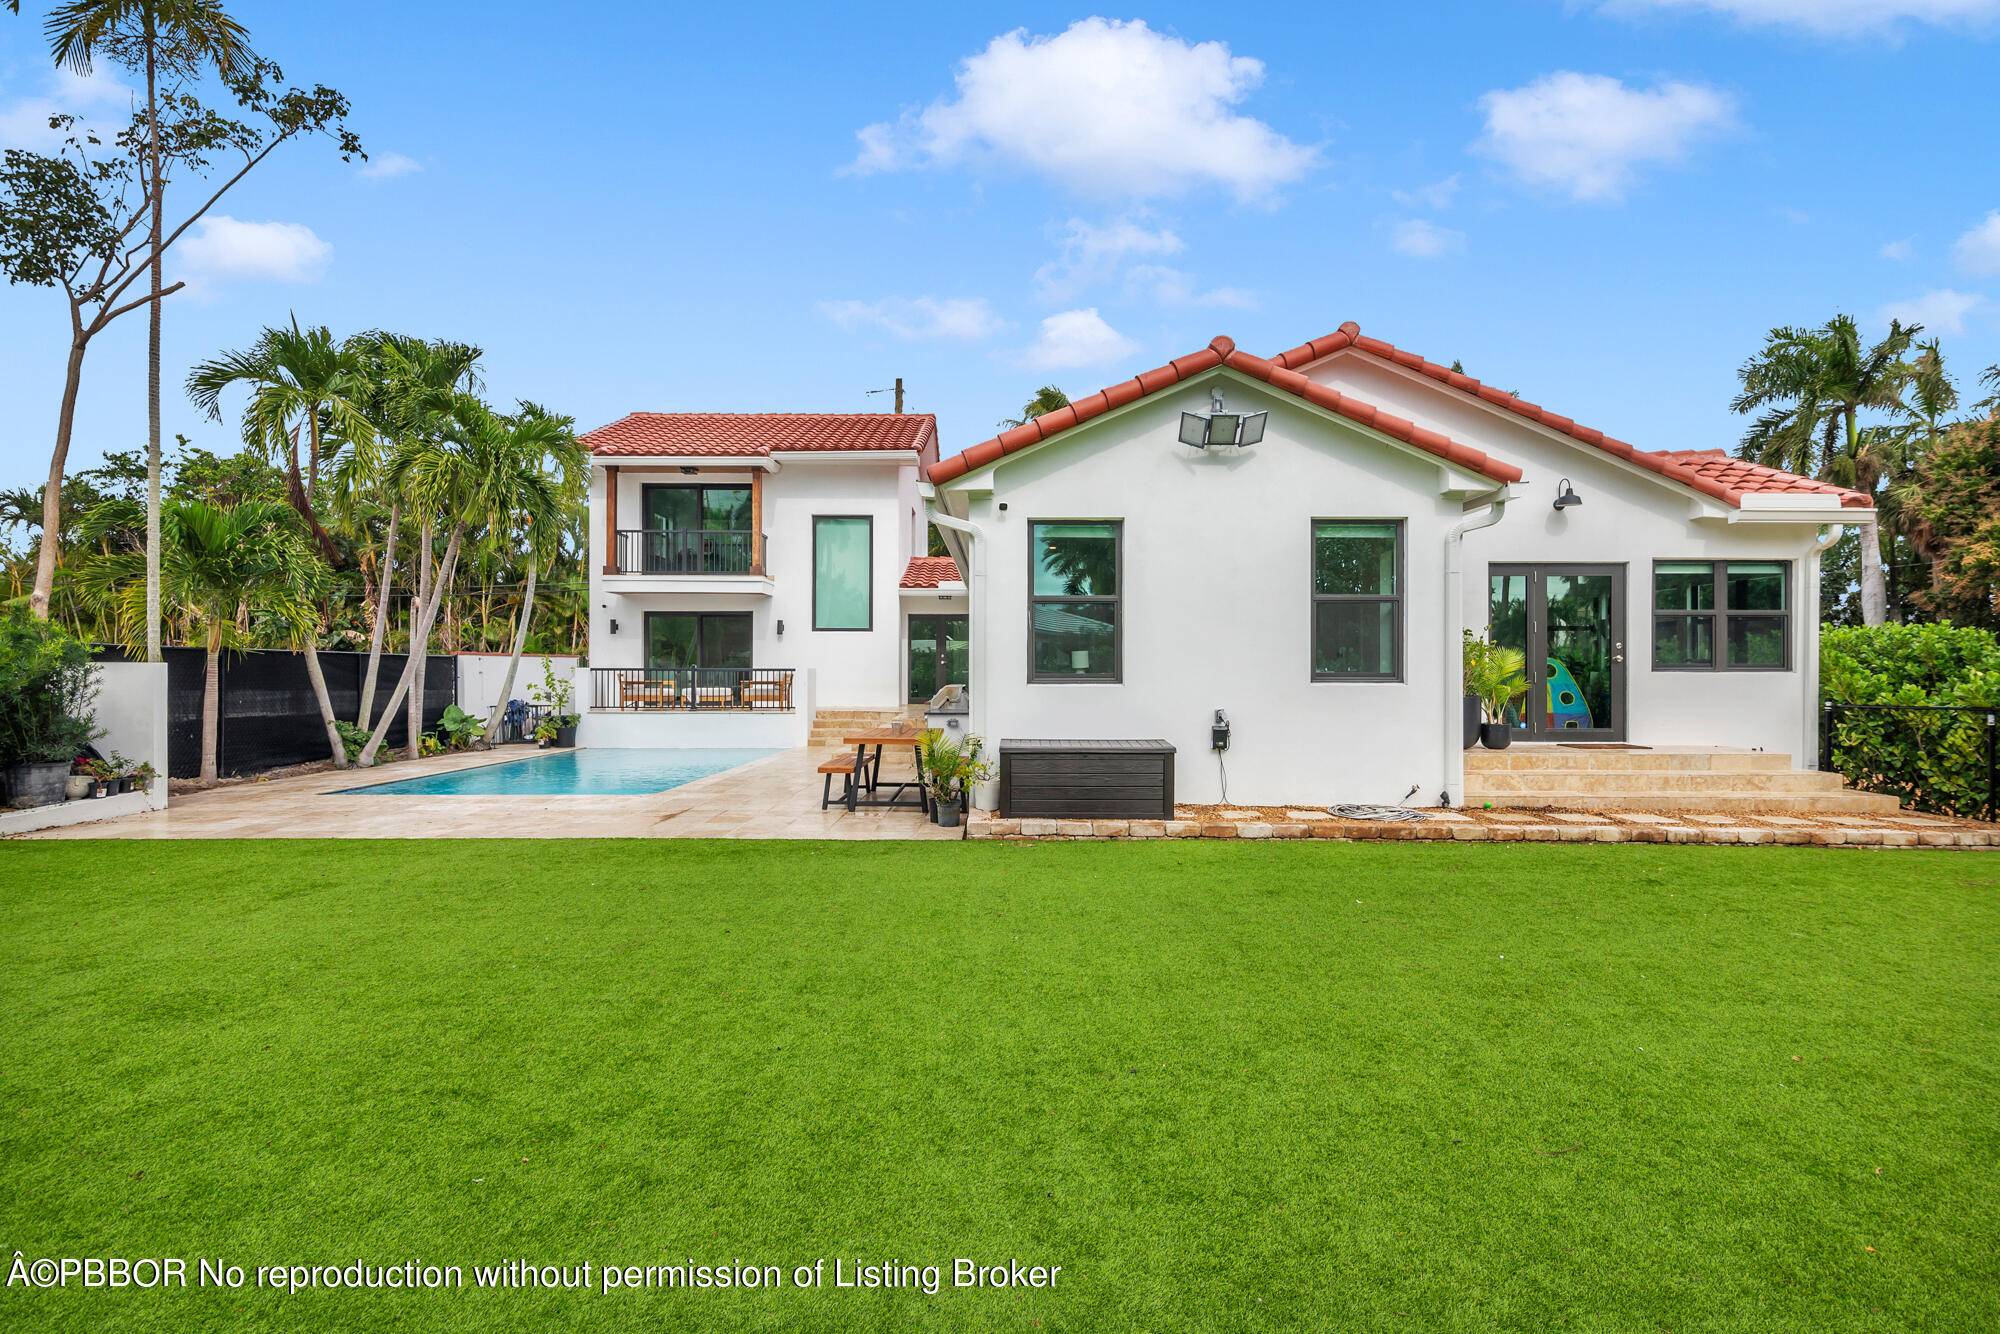 Welcome to 3323 N Flagler Dr in the sought after Northwood Shores of West Palm Beach.